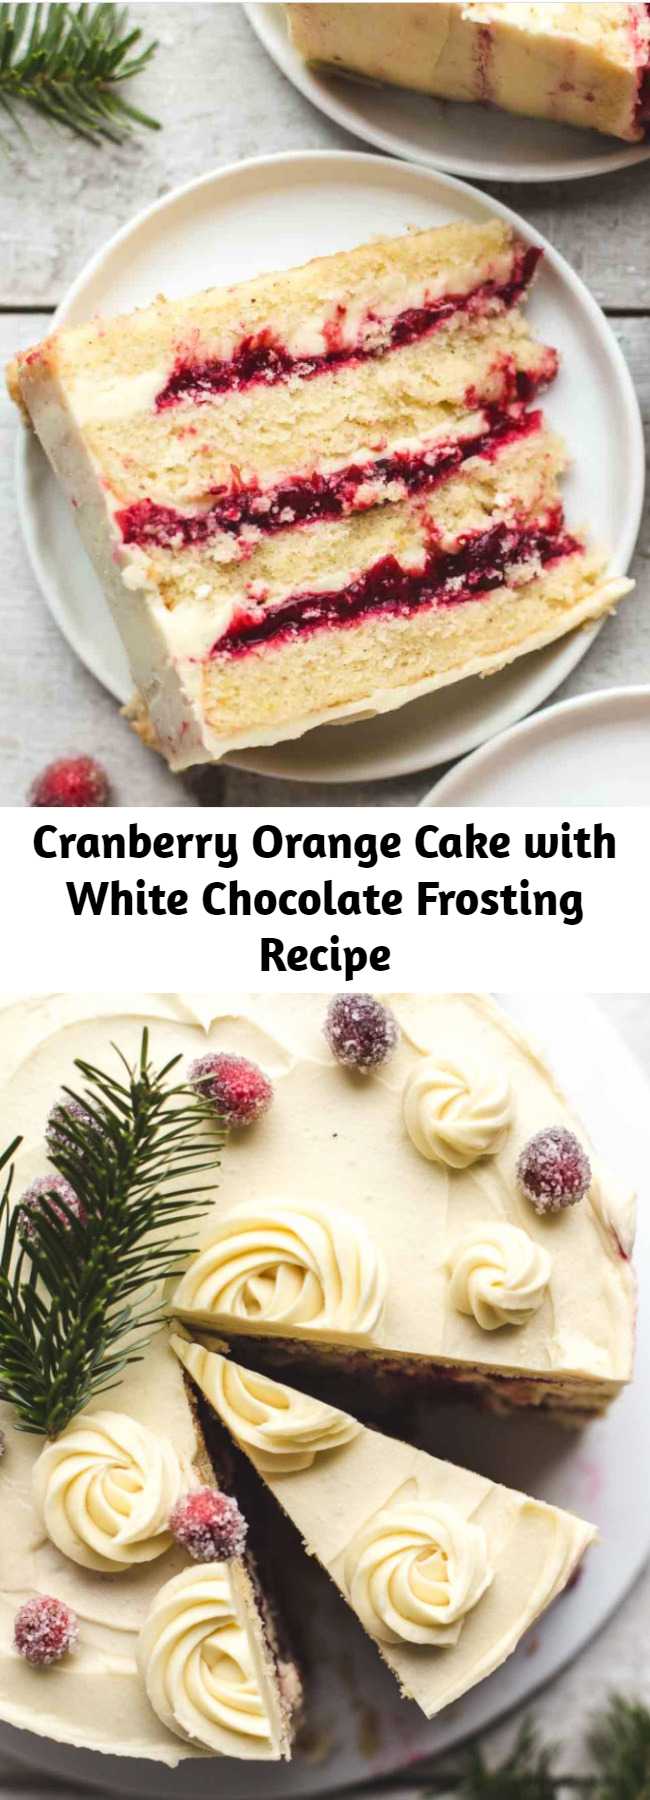 Cranberry Orange Cake with White Chocolate Frosting Recipe - This Cranberry Orange Cake is made of 4 fluffy orange cake layers, a homemade cranberry filling, and a super creamy white chocolate frosting. #buttercream #whitechocolate #chocolate #cranberry #orange #orangecake #cake #christmas #christmascake #dessert